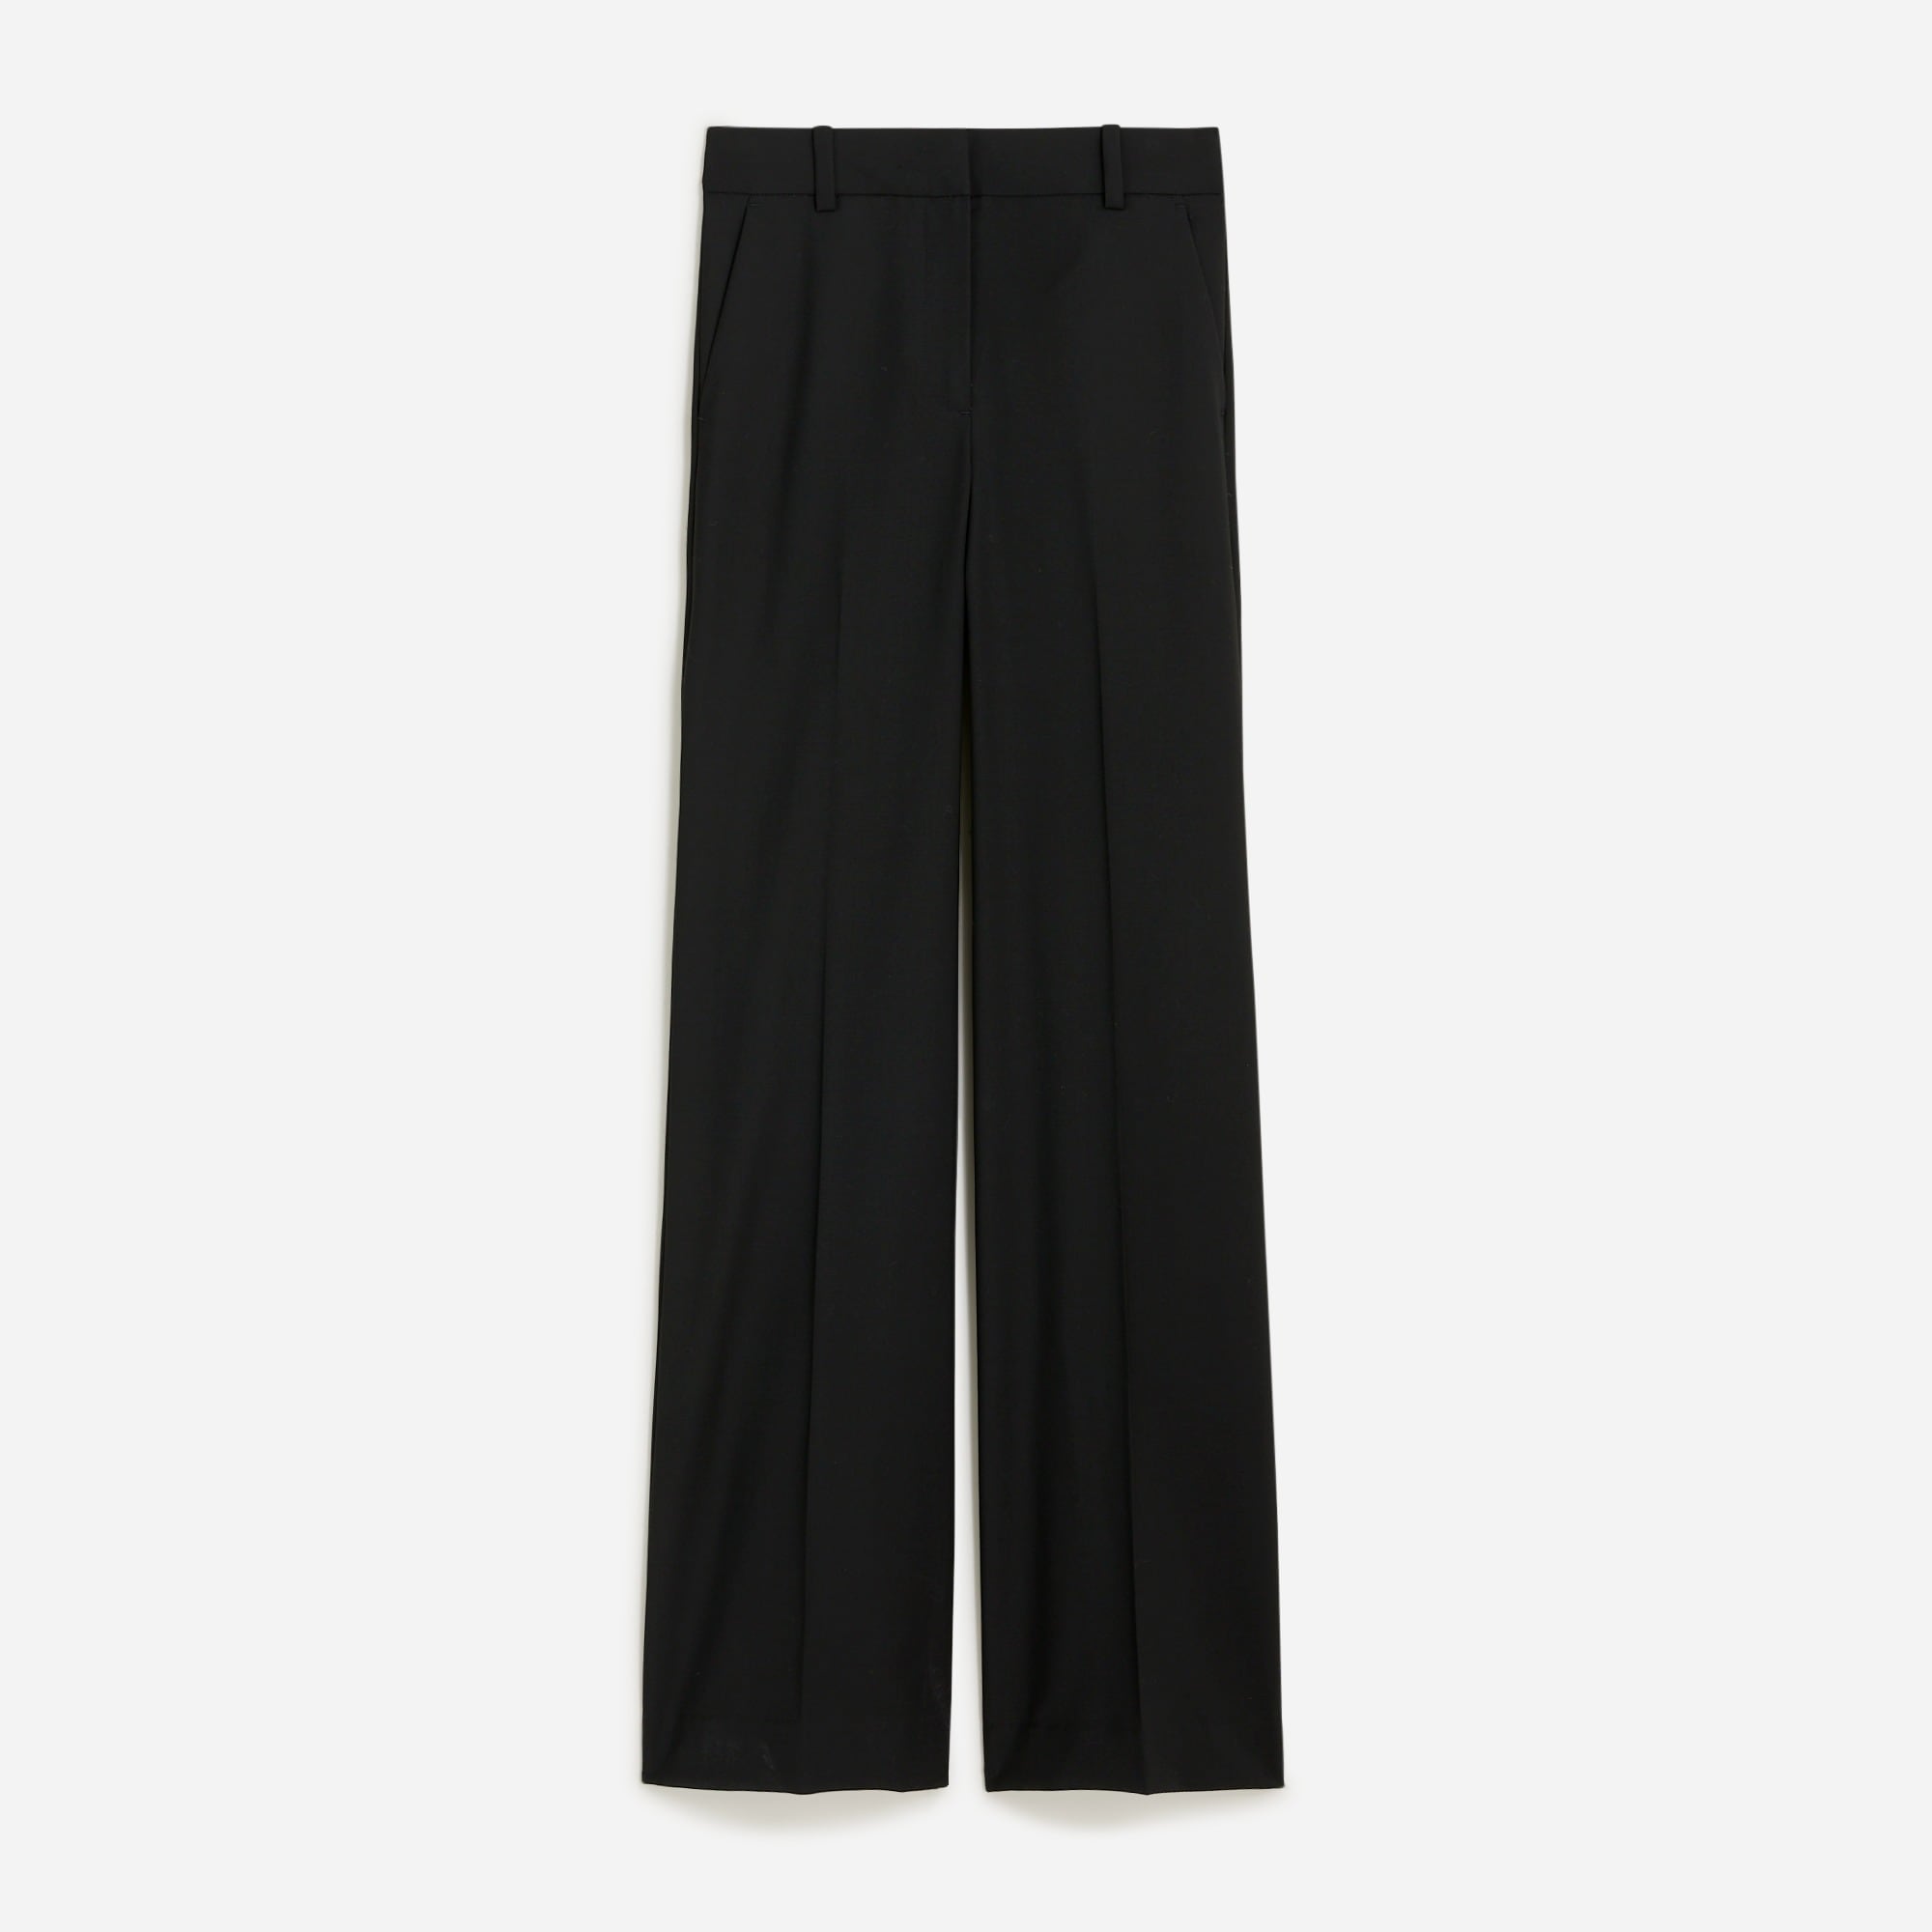  Tall Carolina flare pant in lightweight suiting wool blend